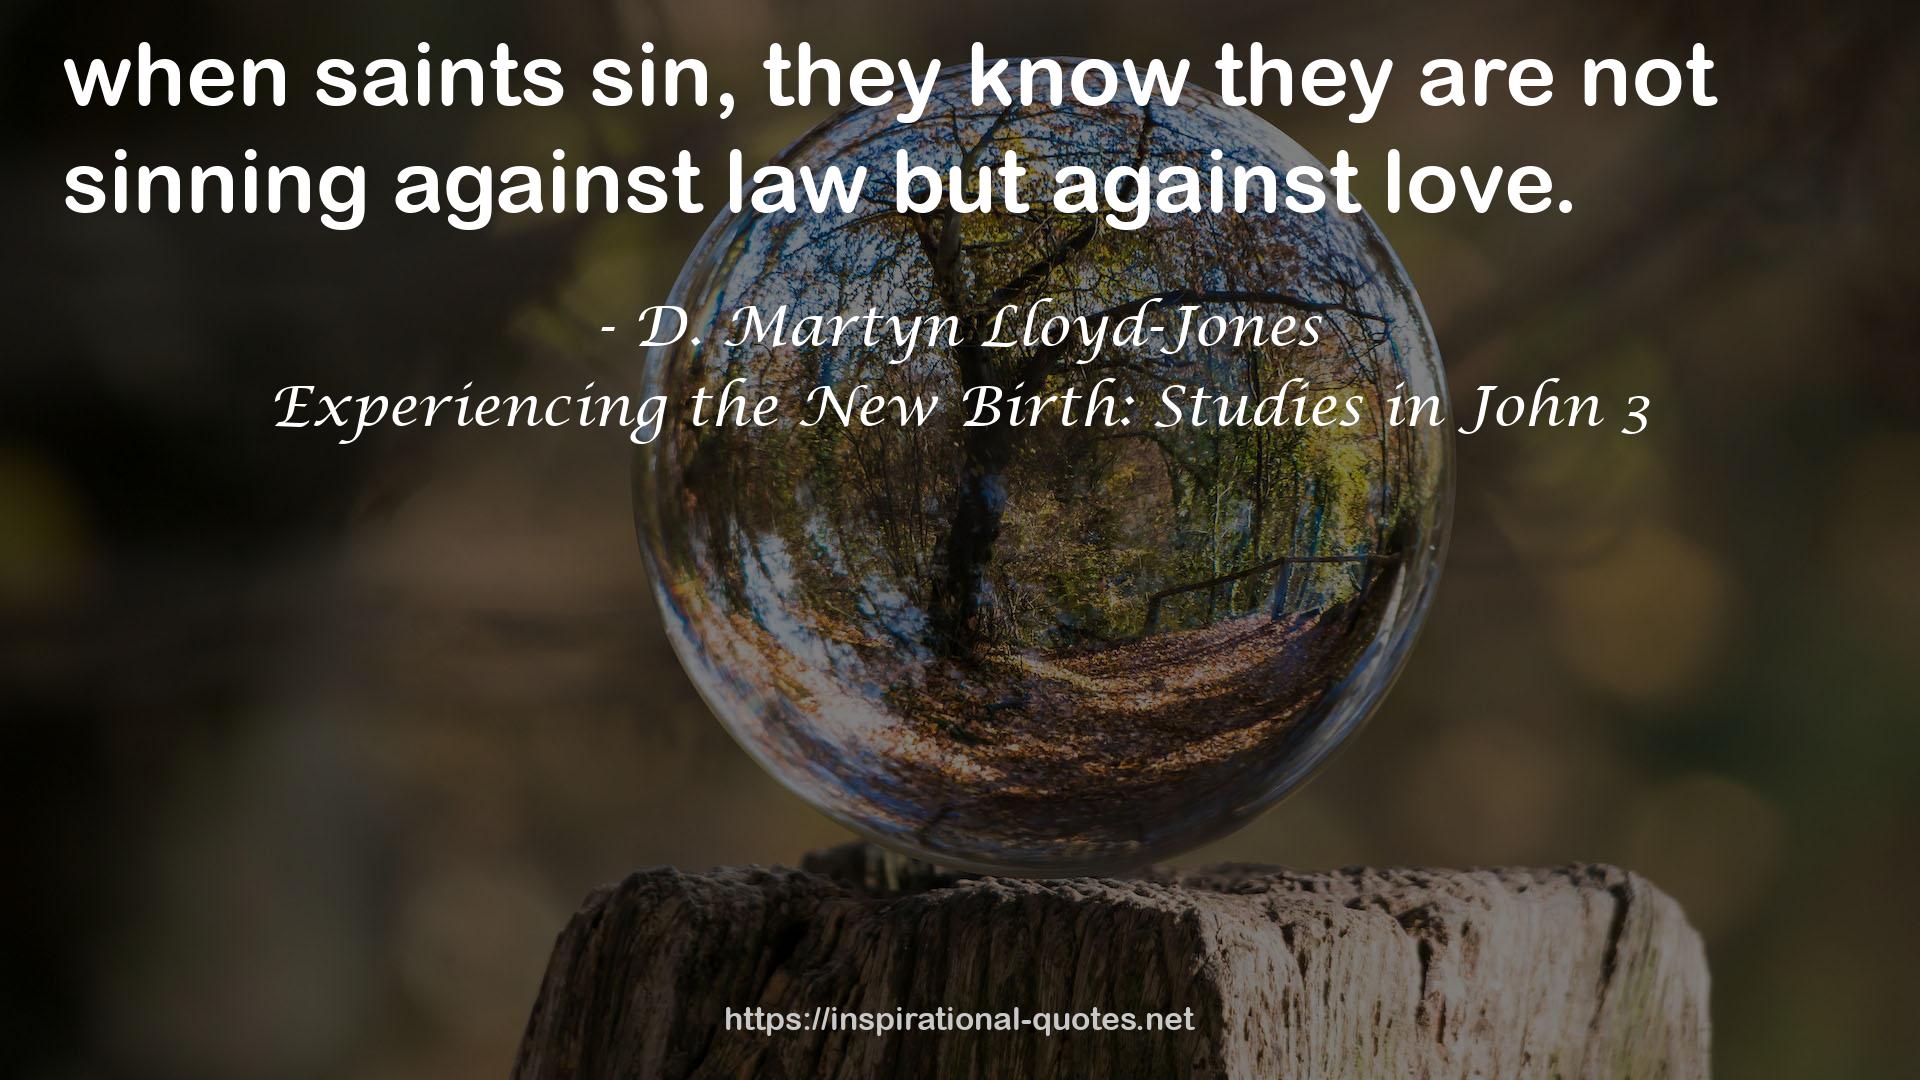 Experiencing the New Birth: Studies in John 3 QUOTES